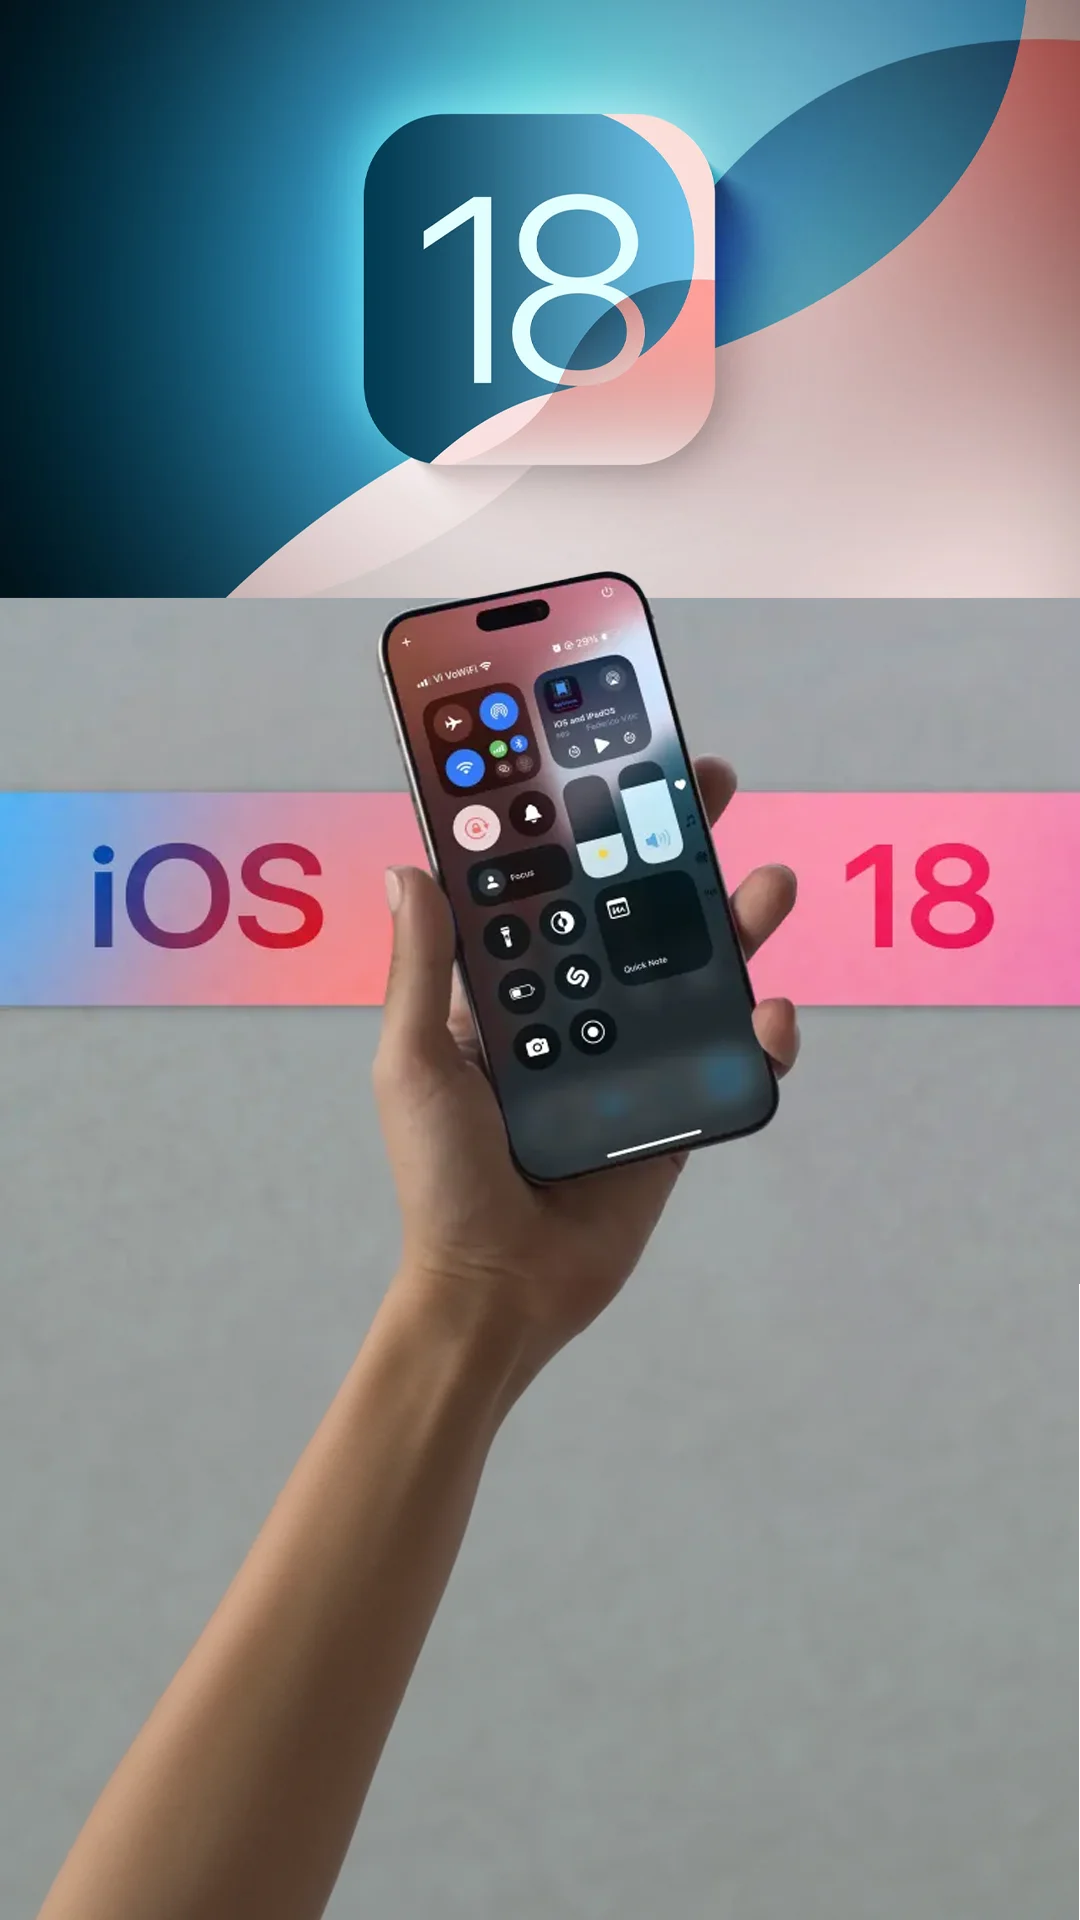 Top 10 Exciting Features Of IOS 18 | iFixScreens